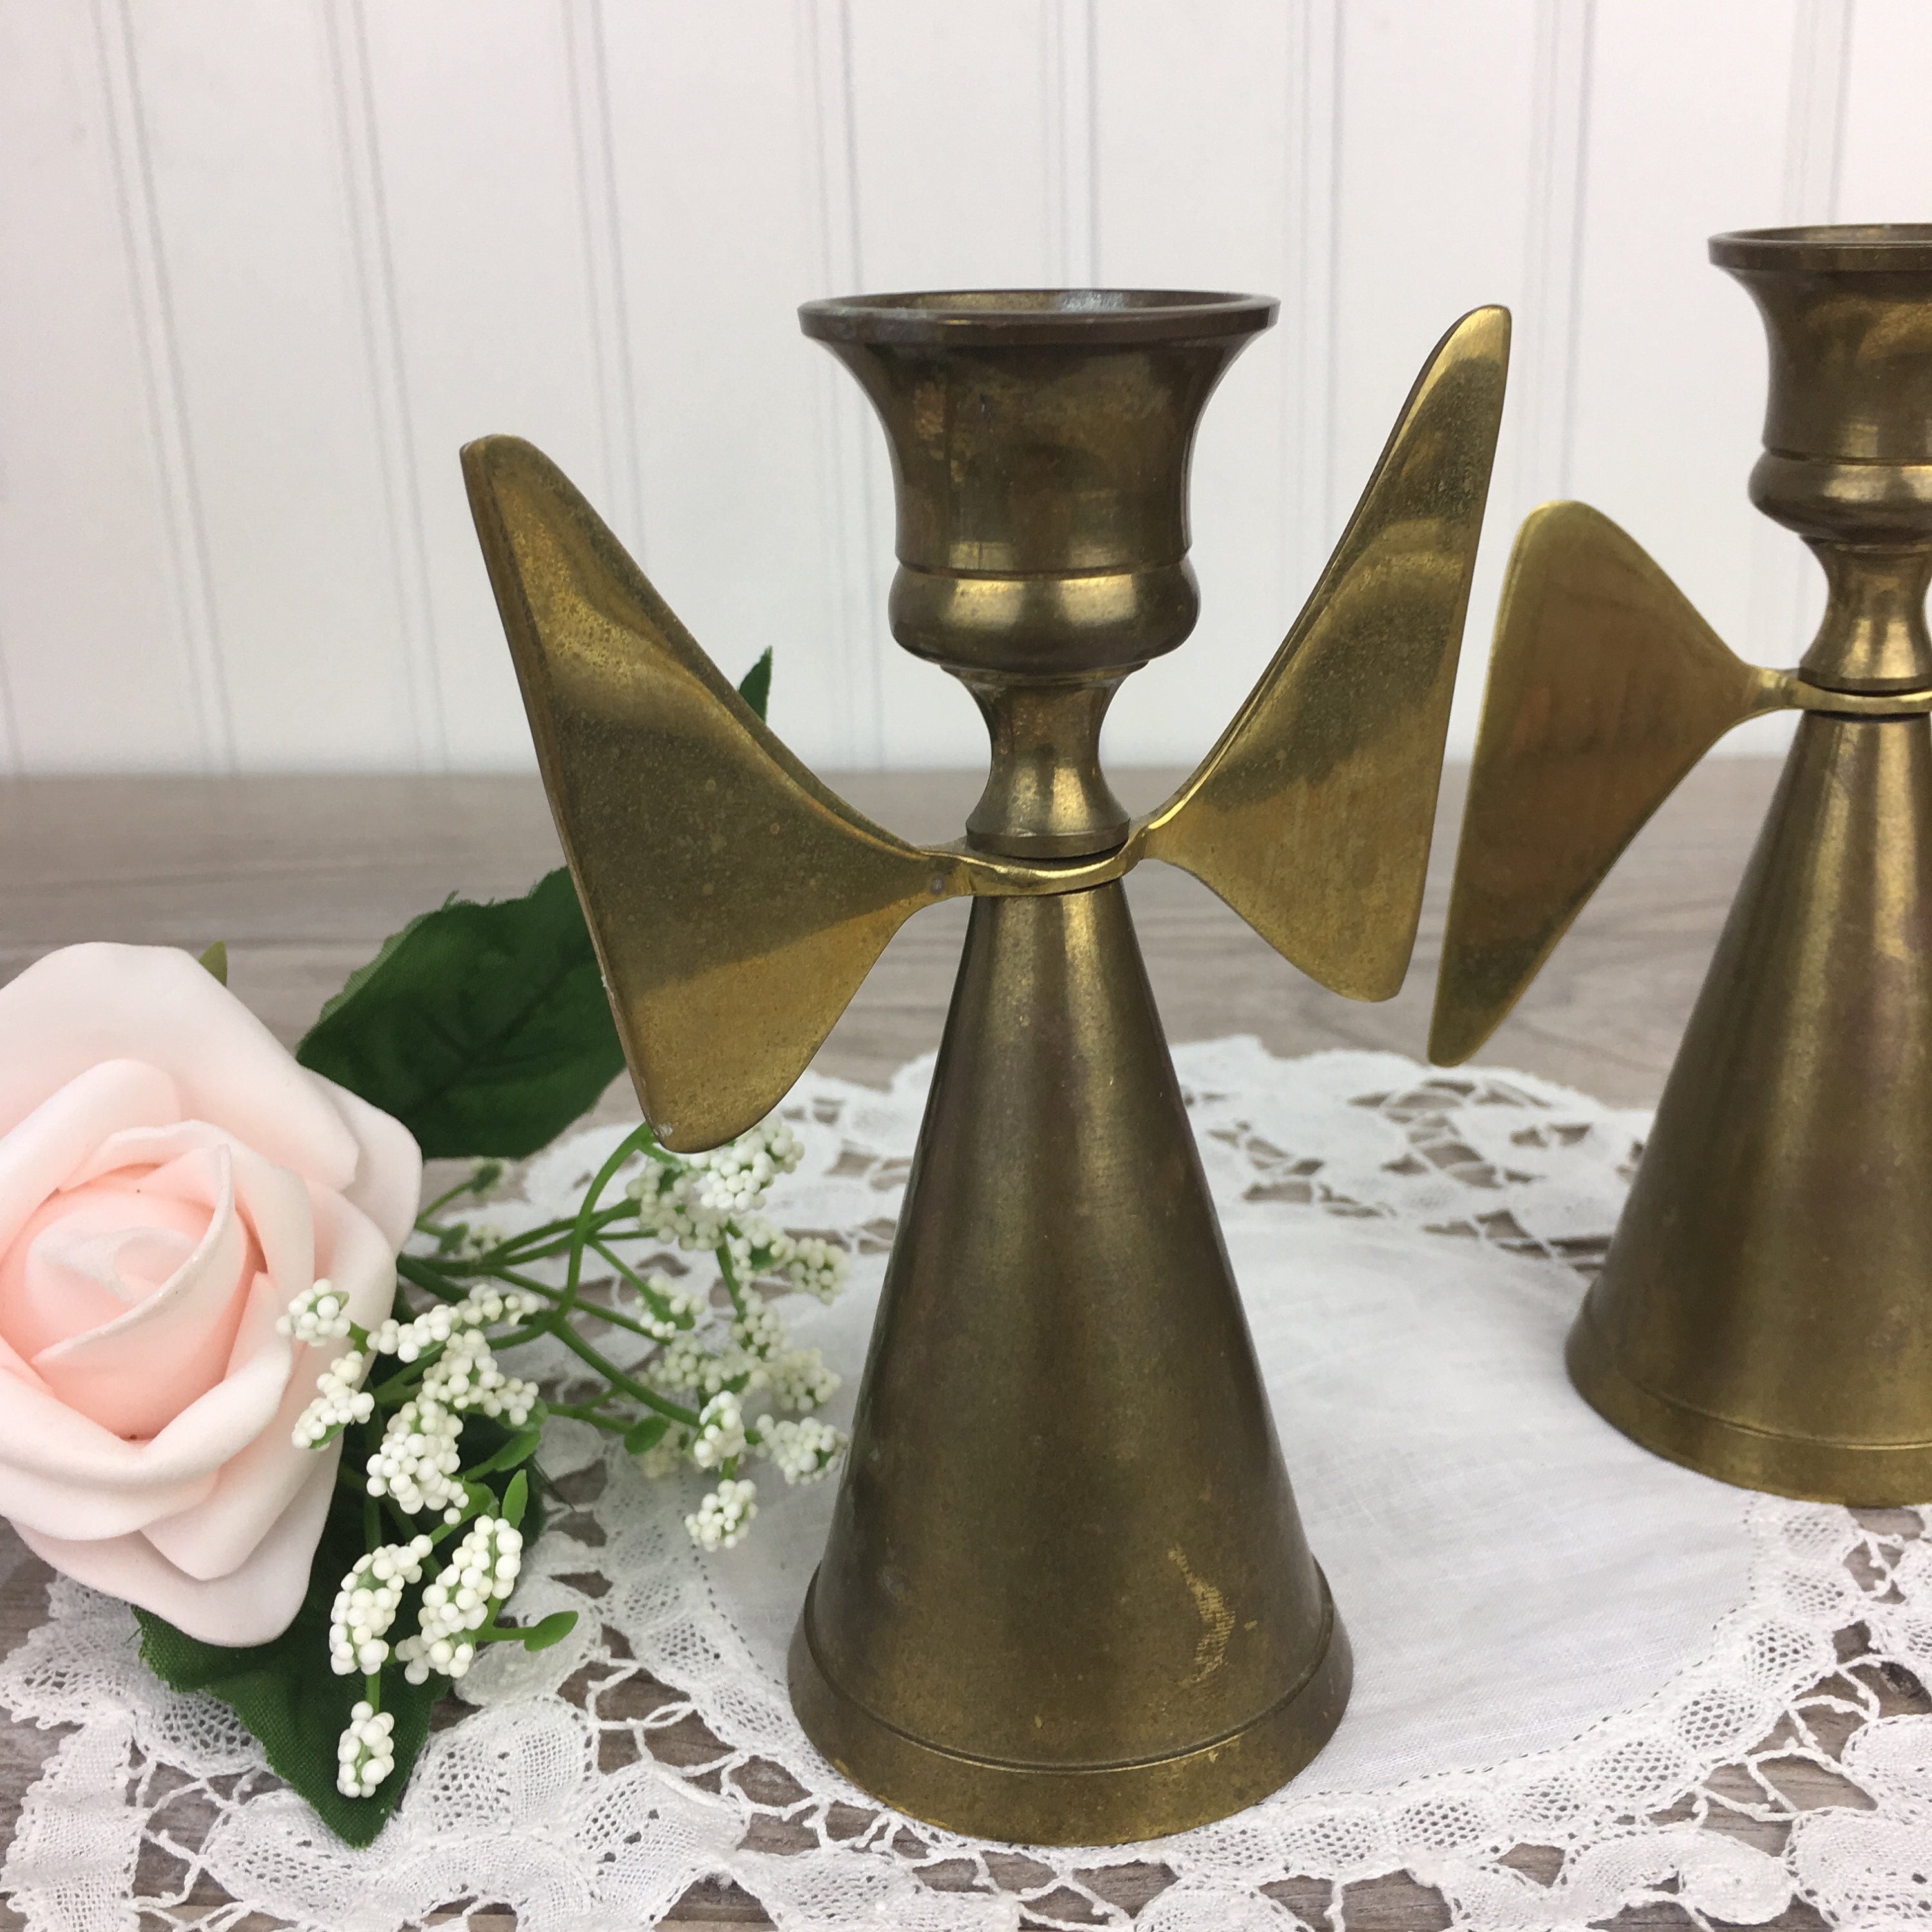 Vintage Candle Holders - Brass - Imported From India - Set Of 2